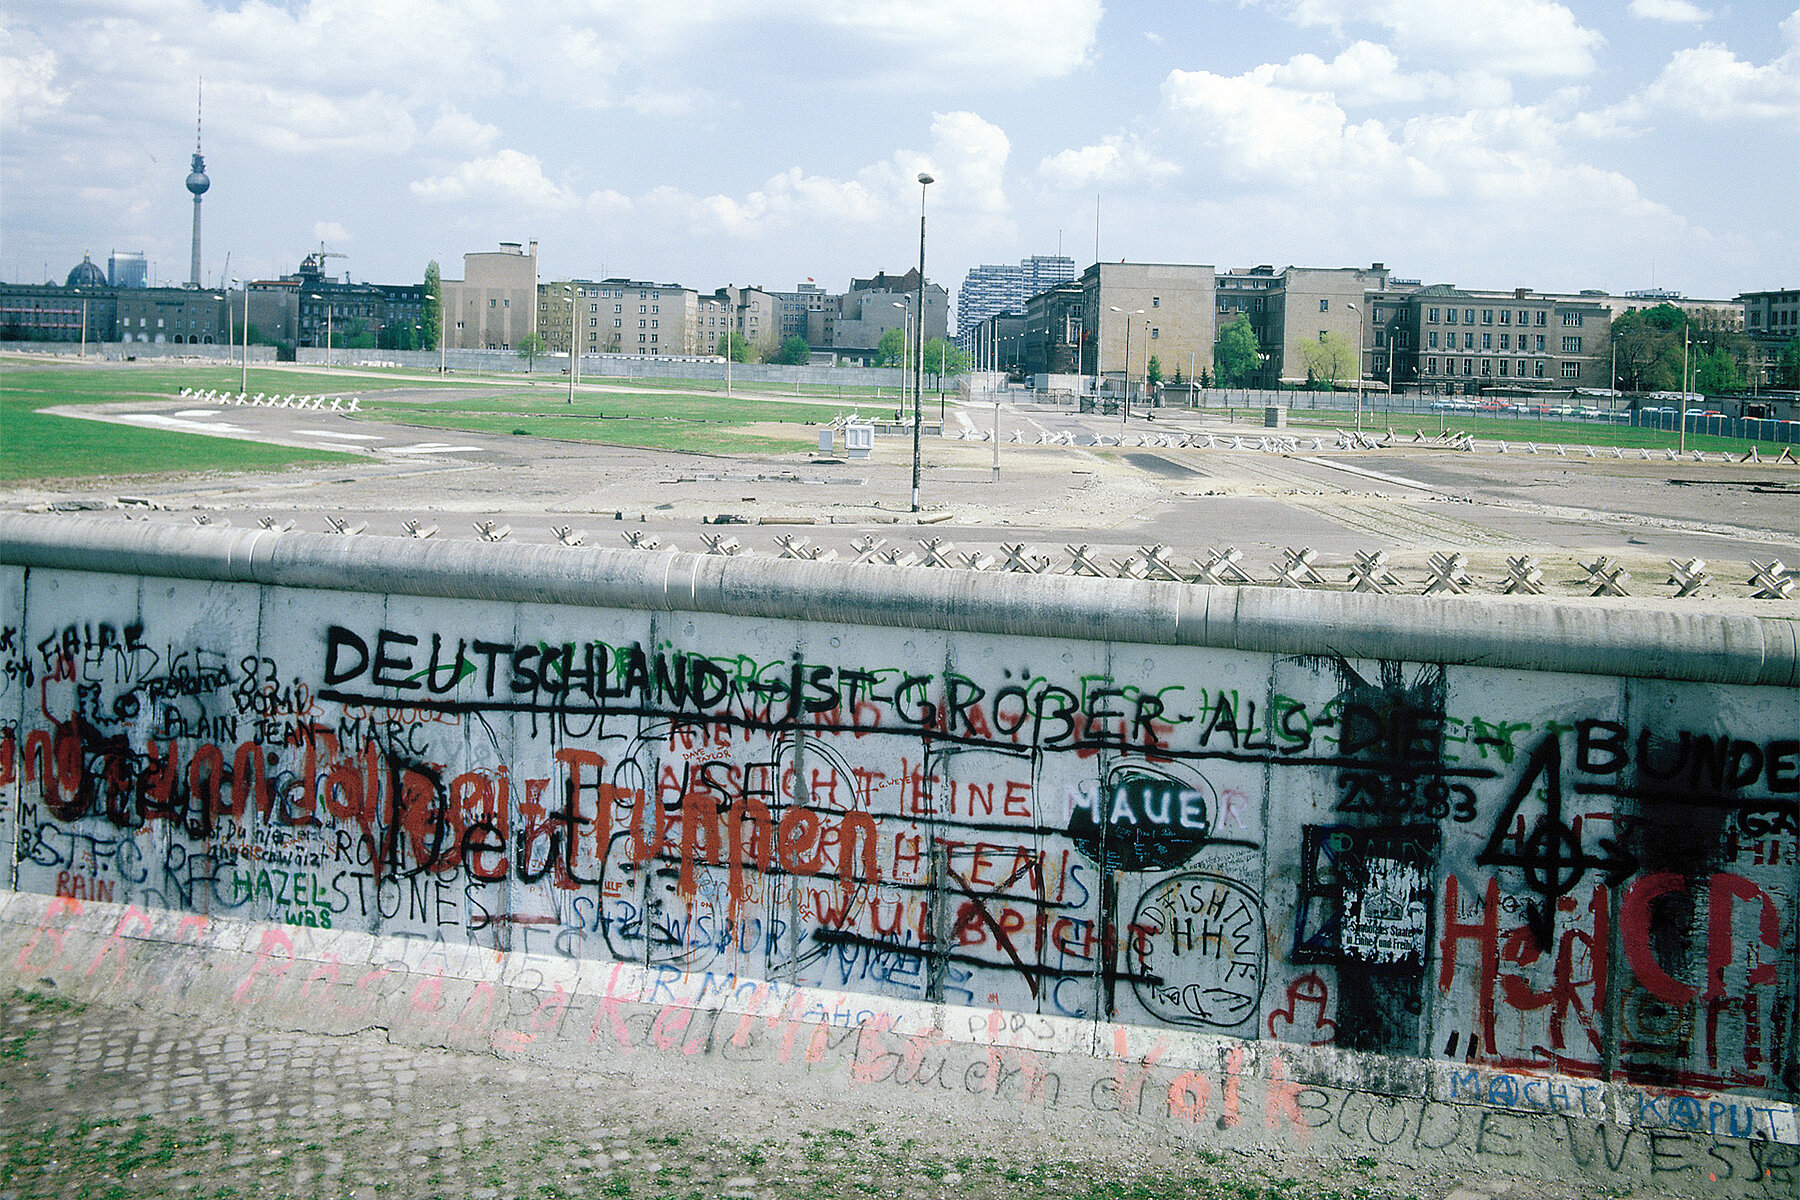 The Wall at Potsdamer Platz. It is painted with black and red lettering and behind it is a wasteland.